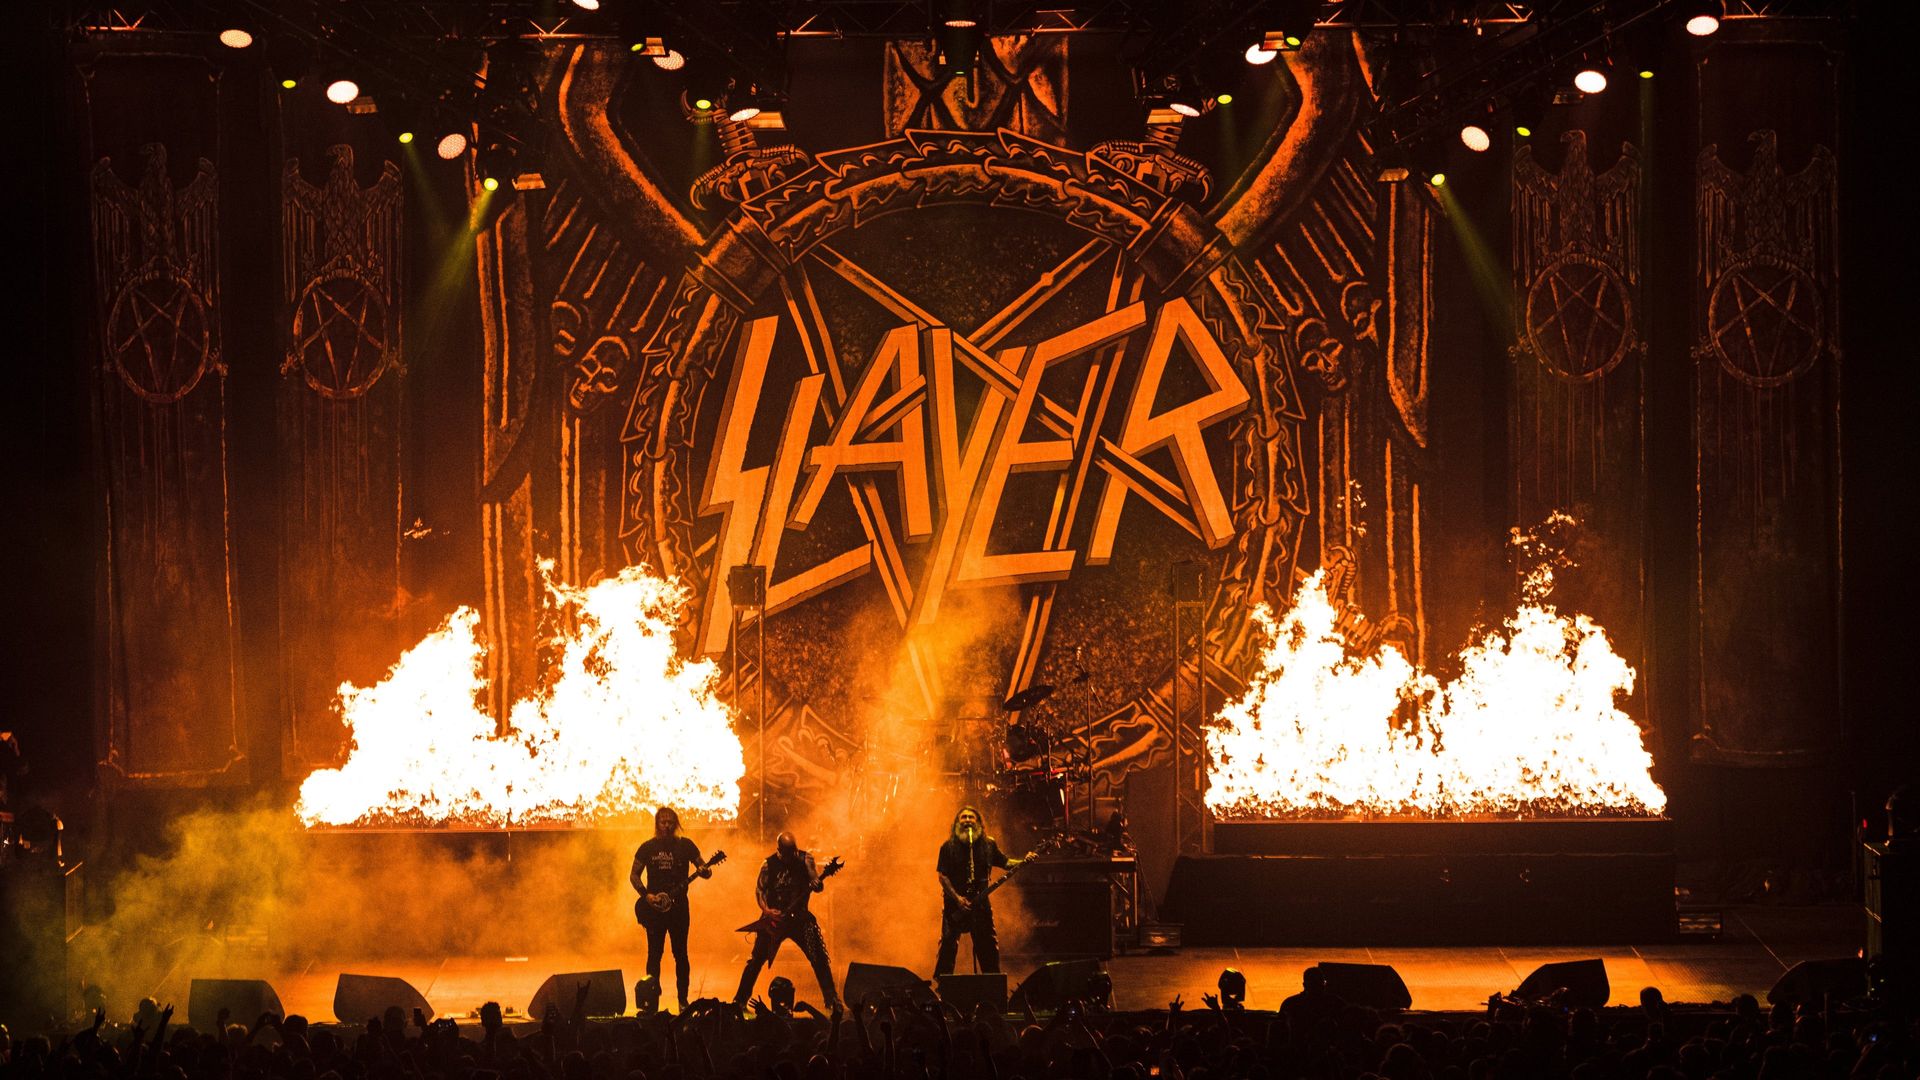 Slayer: The Repentless Killogy background